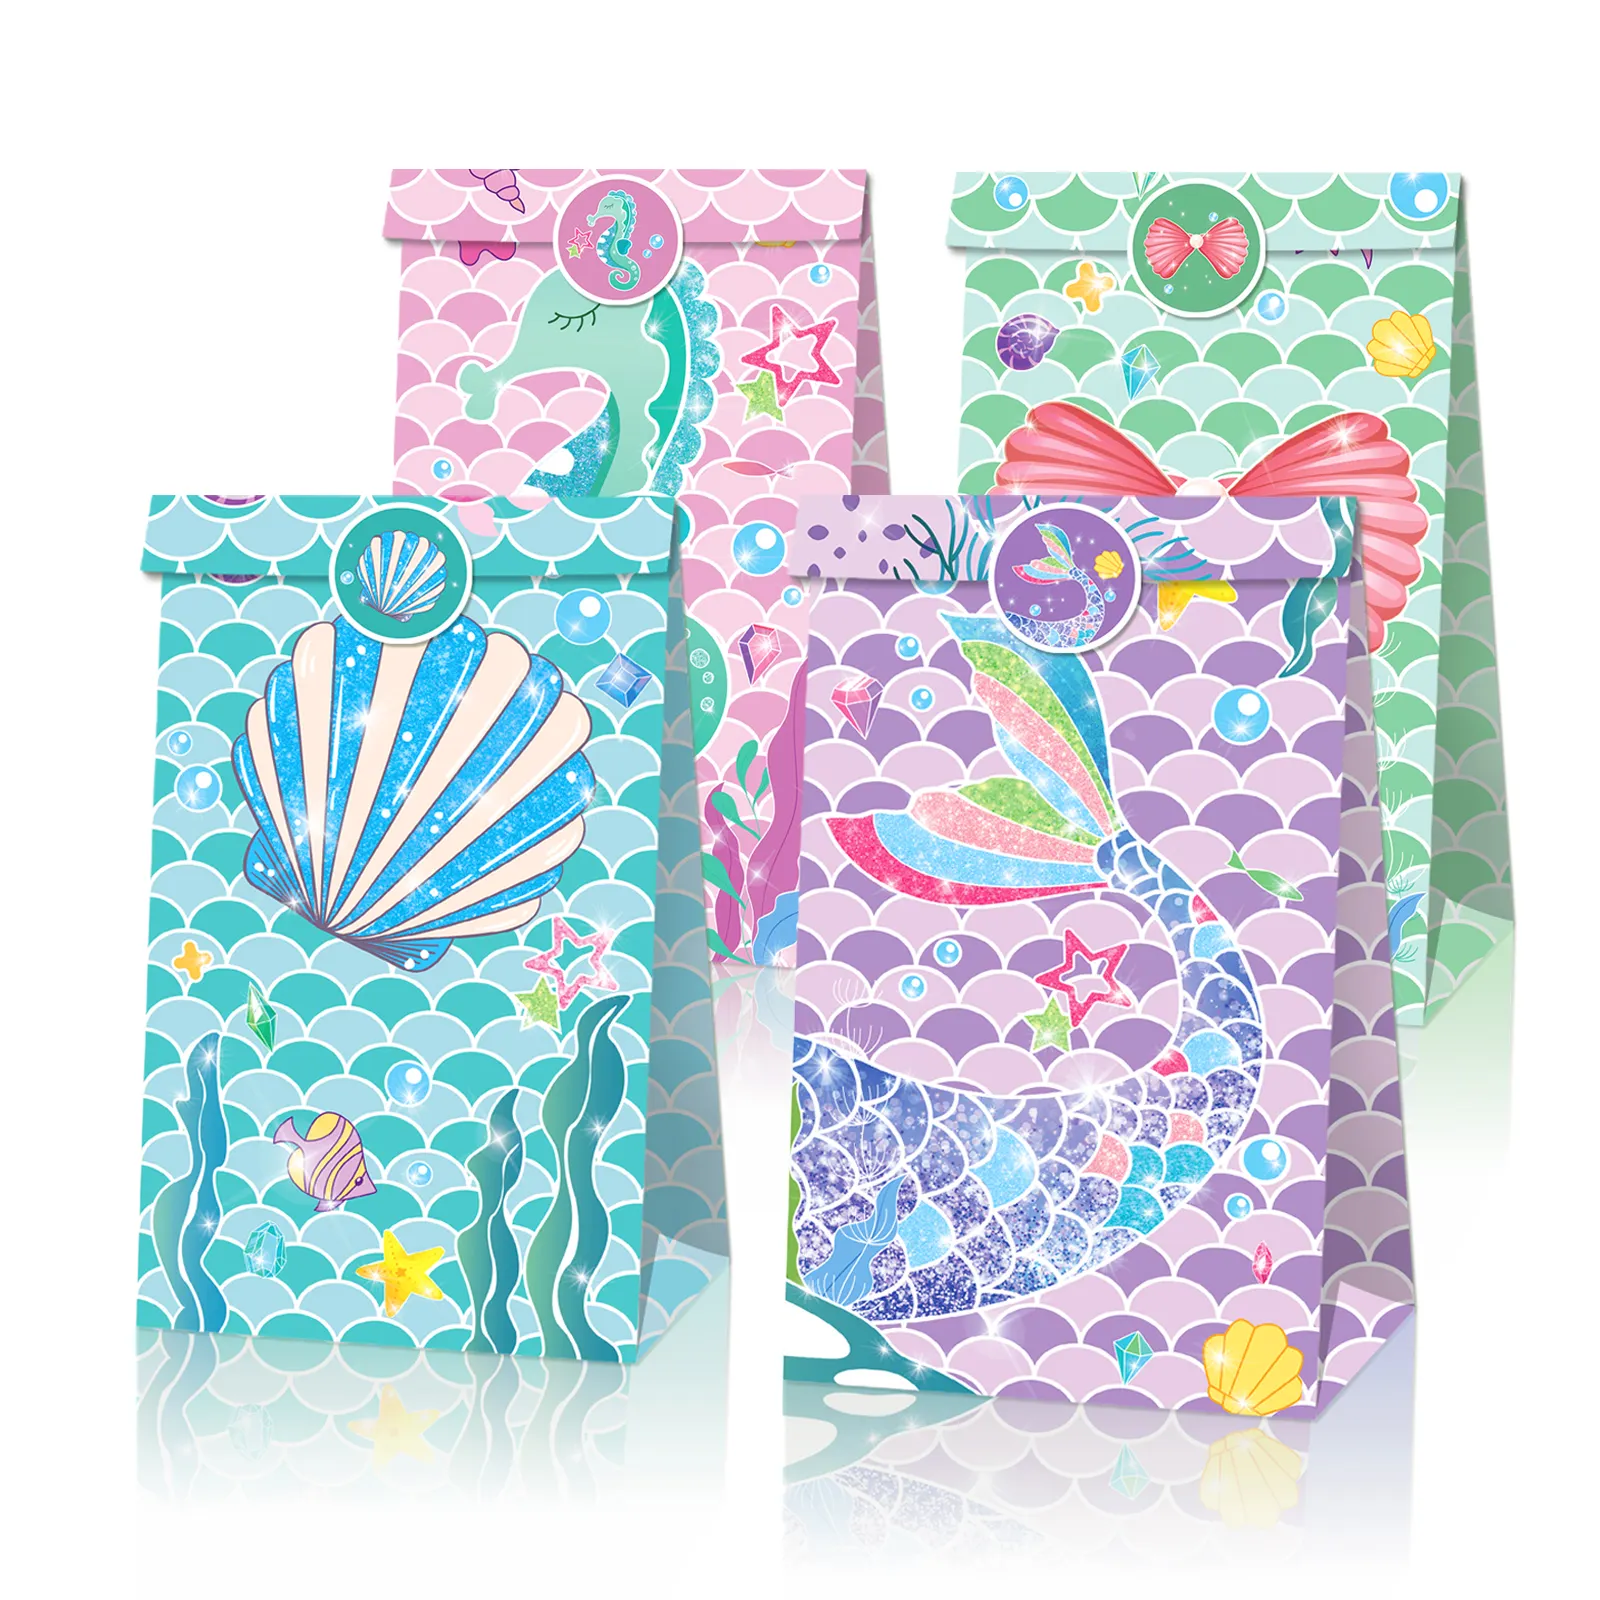 Huancai Mermaid Party Favors Bag sea horse starfish shell design paper bags Gift Candy Treat Bag with Stickers for kids birthday